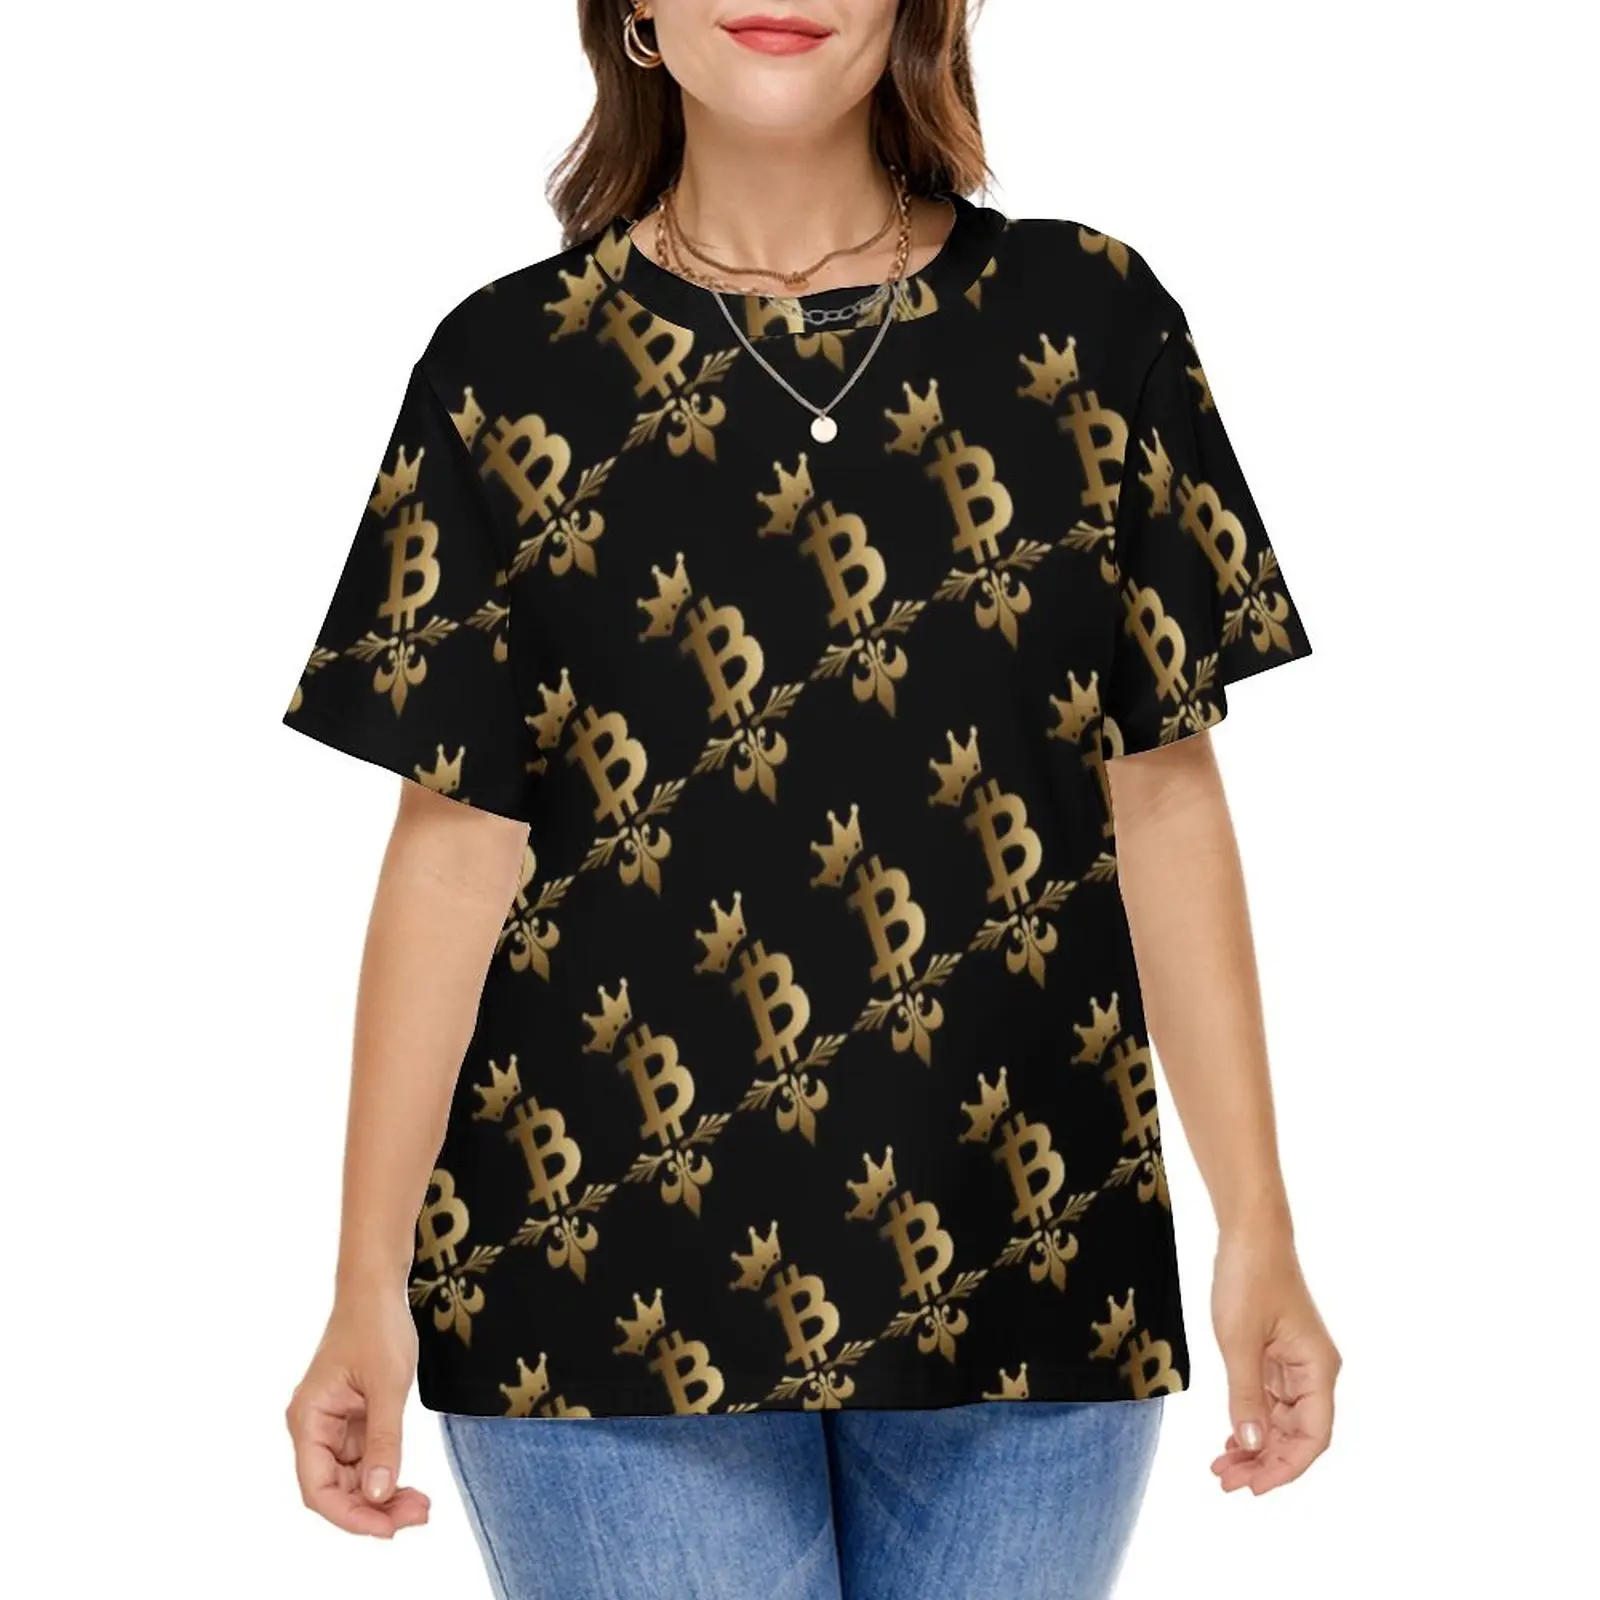 Golden Bitcoin T-Shirt Blockchain Crypto Print Trendy T-Shirts Short Sleeves Simple Tshirt Lady Summer Pattern Clothes Plus Size